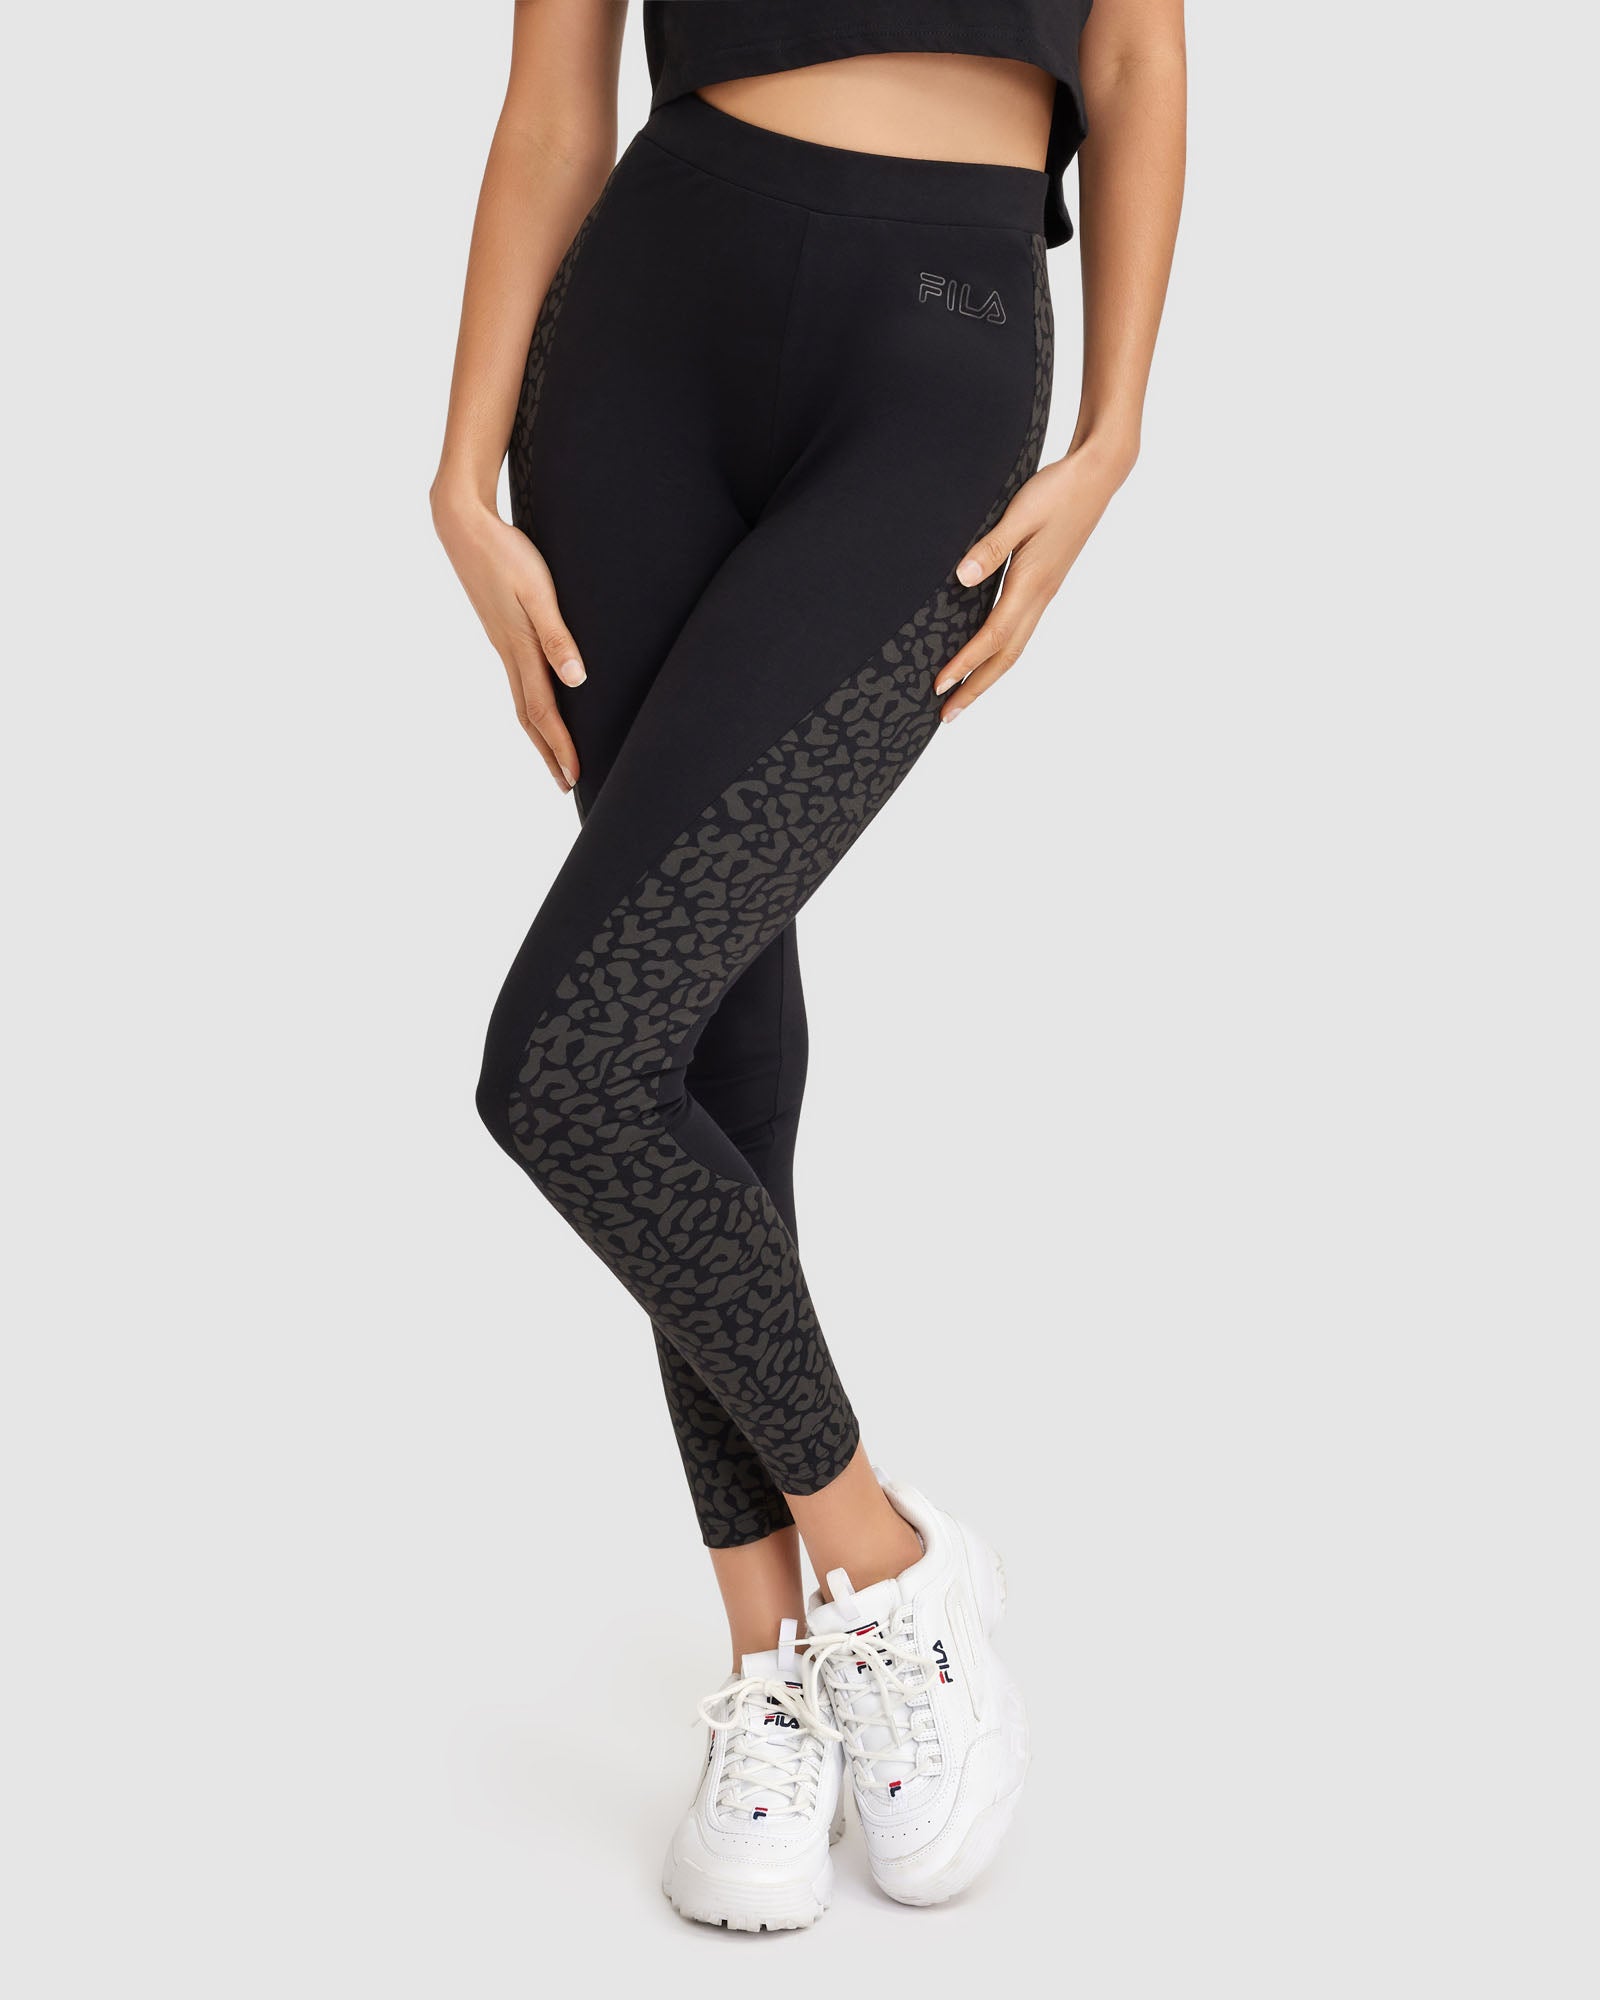 Fabletics Women's Leggings High Waisted Perforated L/8-10 New With Tags